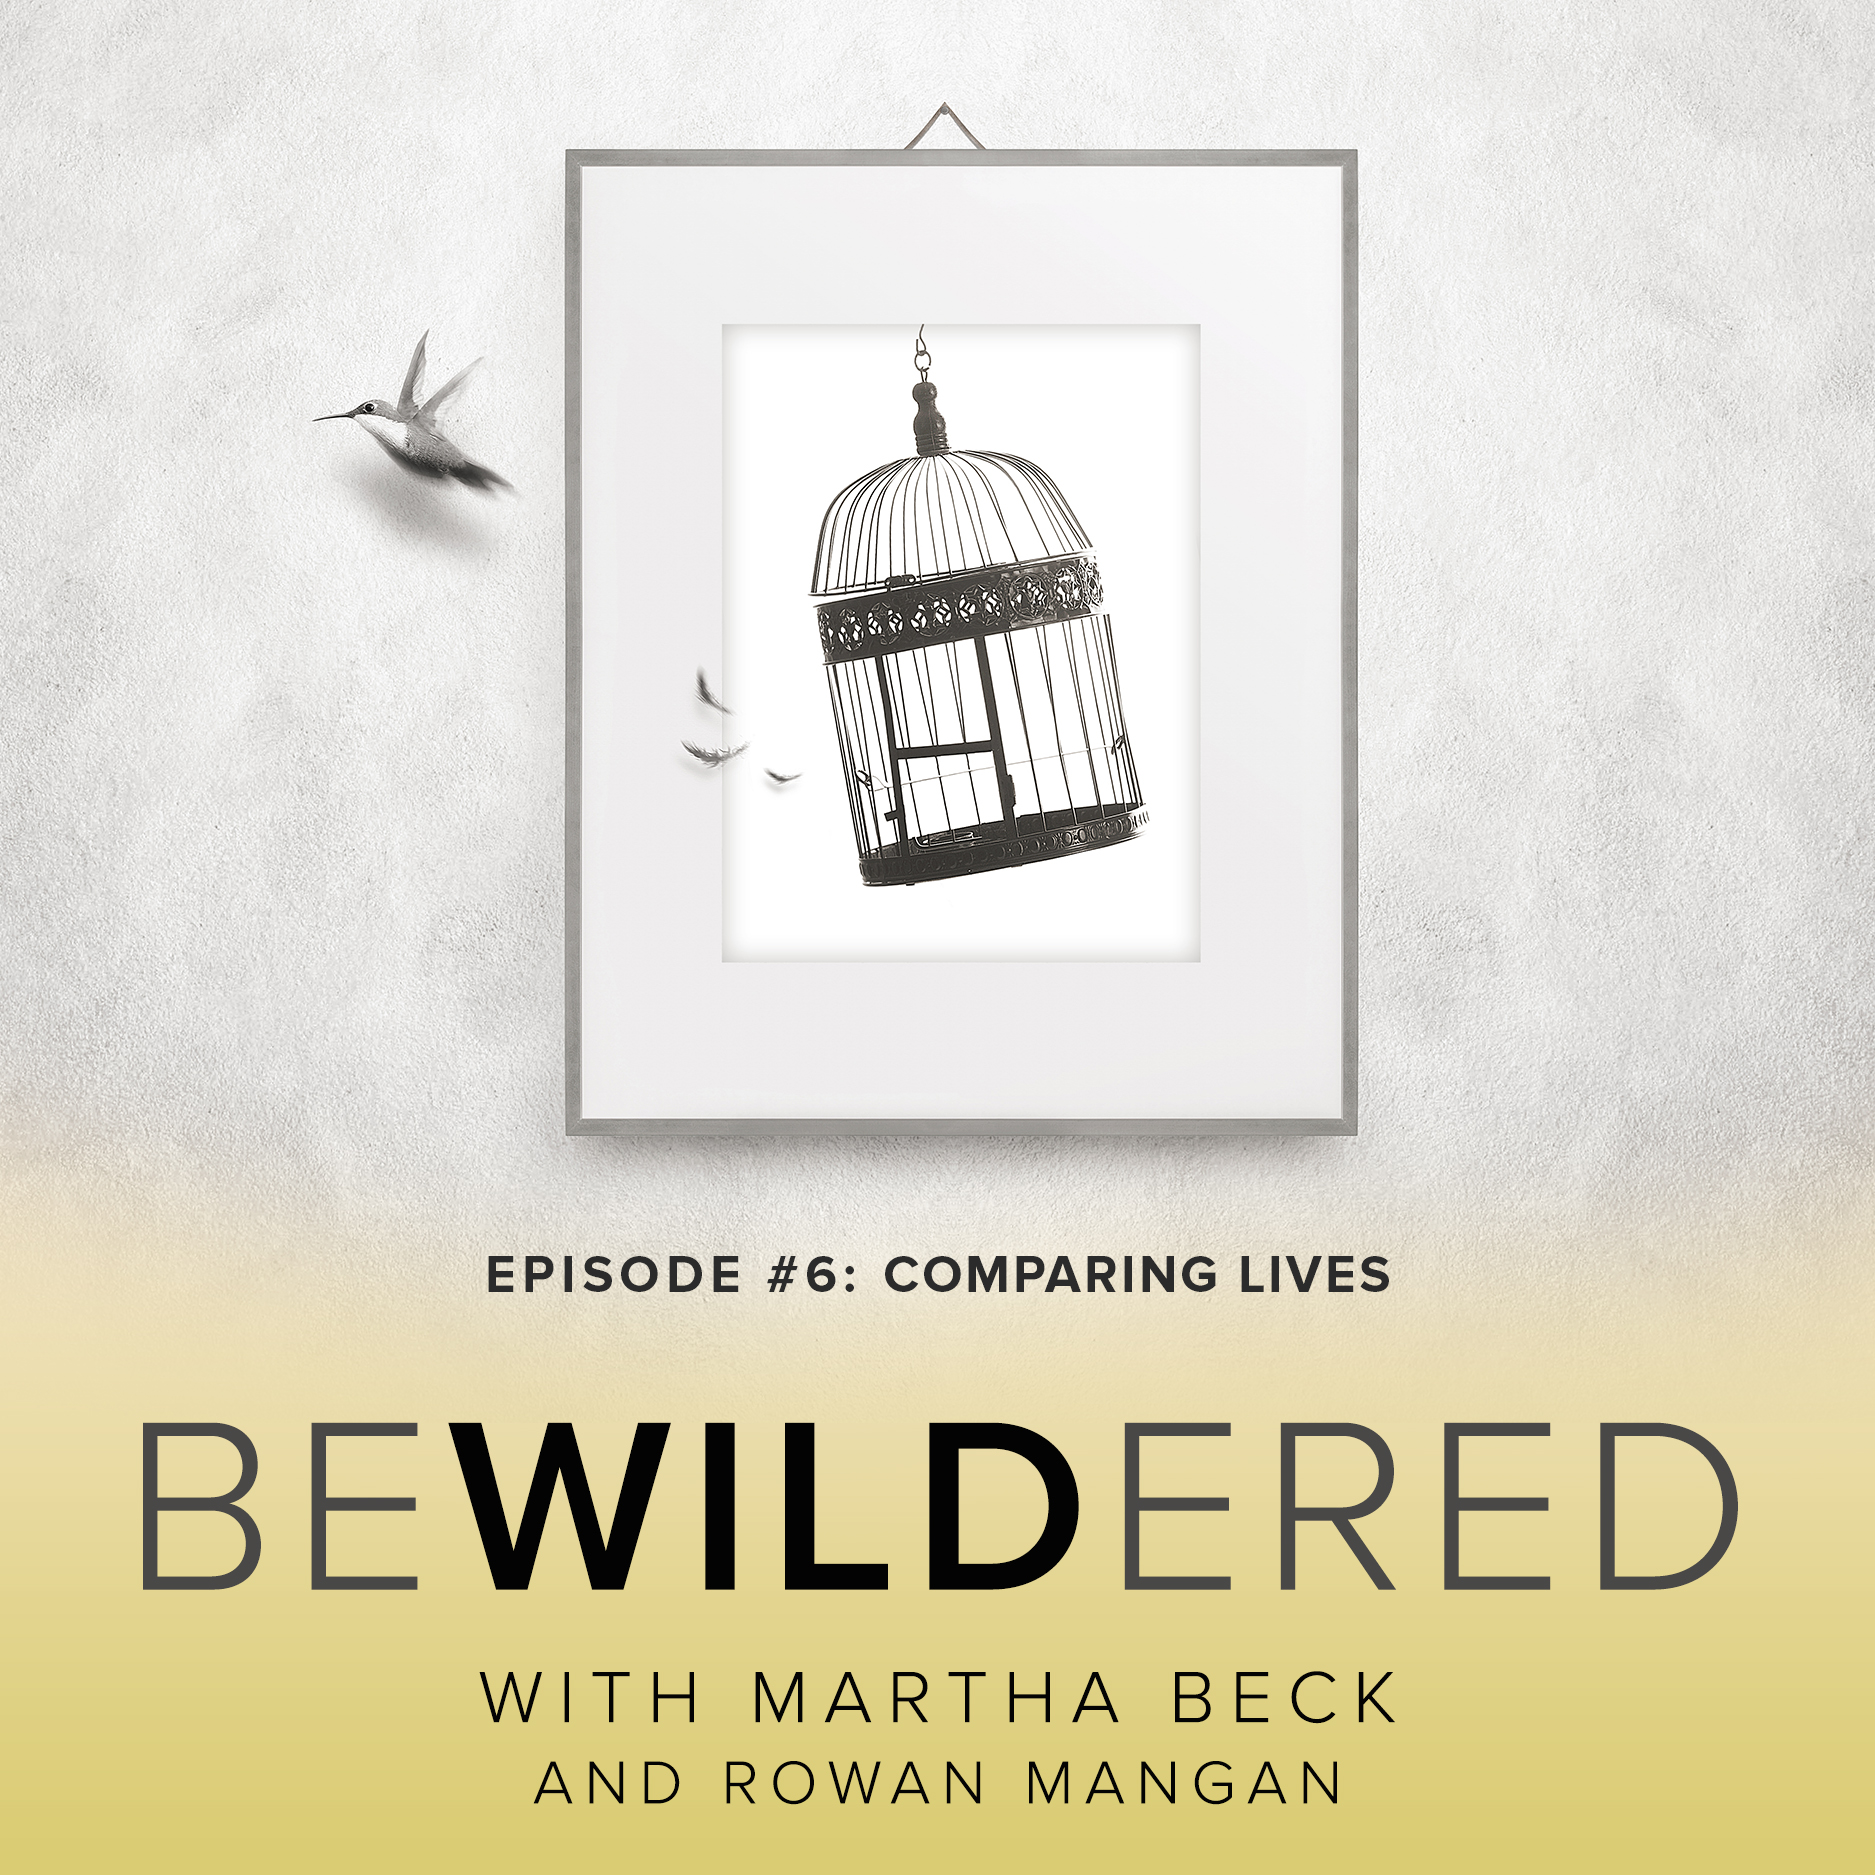 Image for Episode #6 Comparing Lives for the Bewildered Podcast with Martha Beck and Rowan Mangan